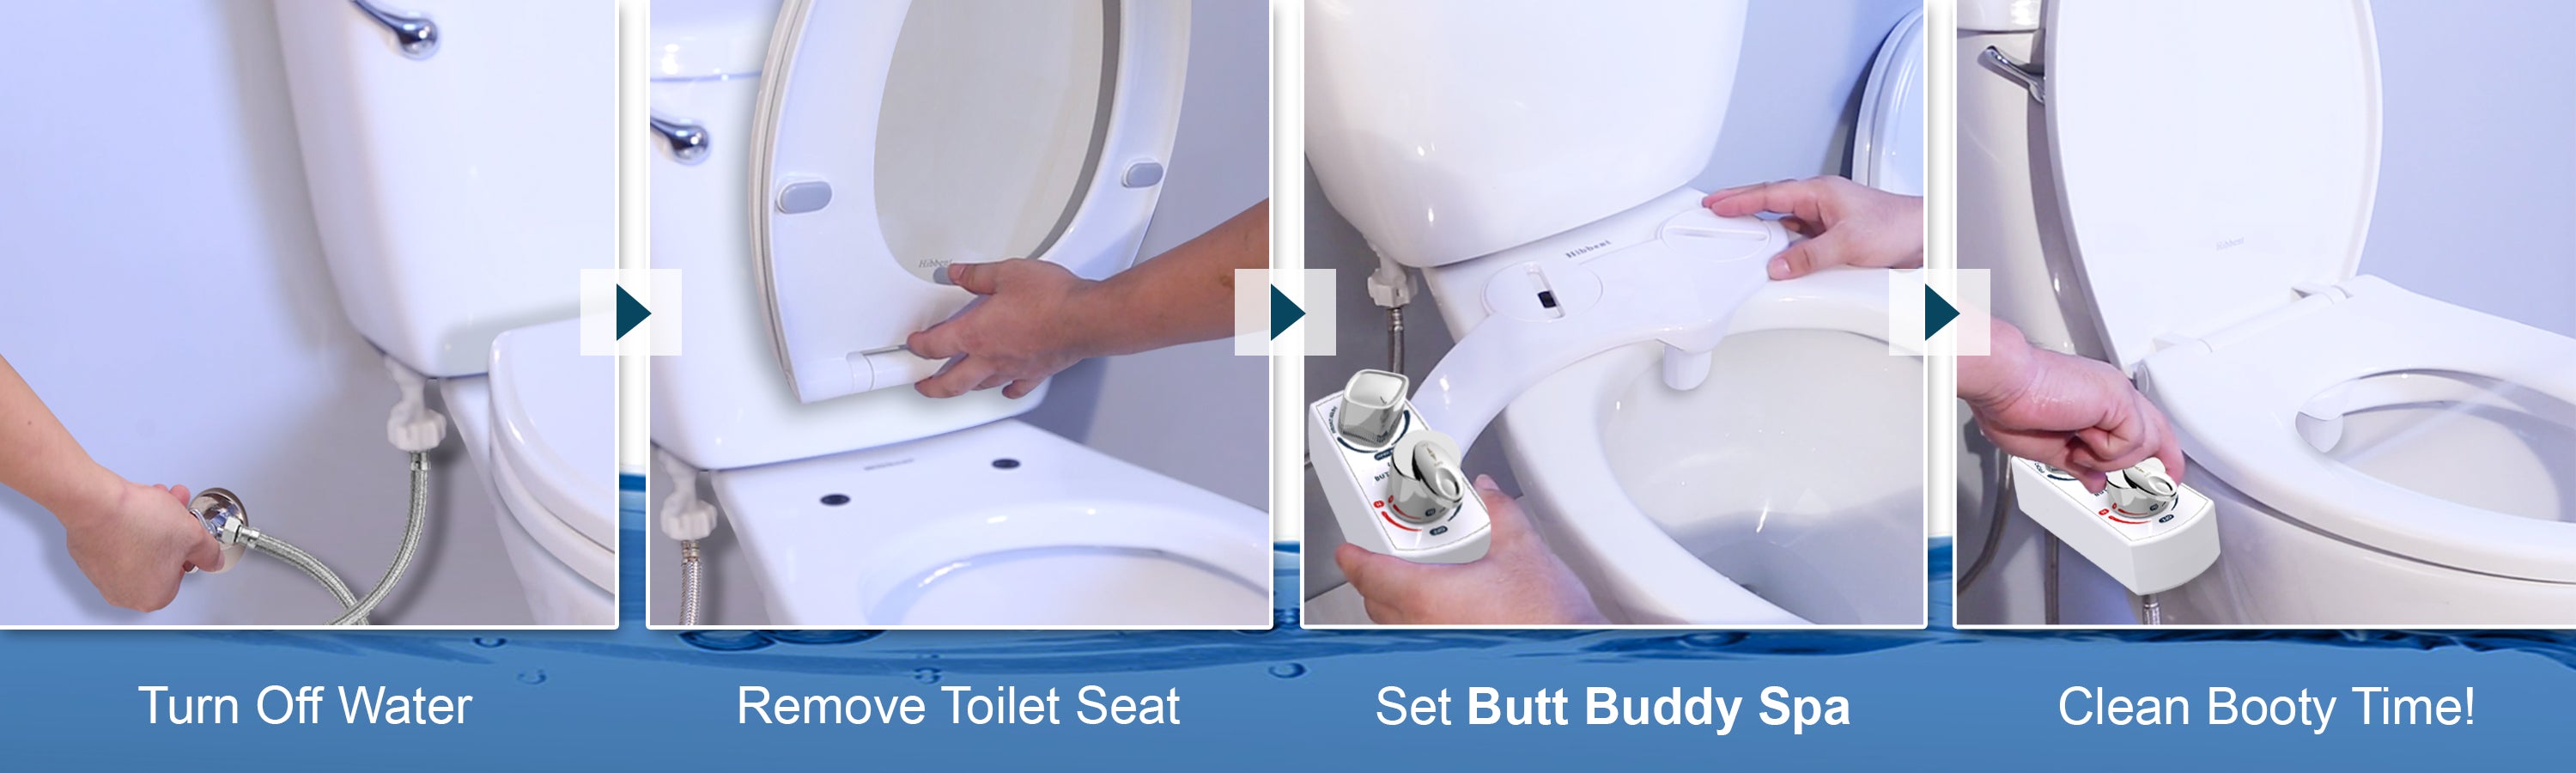 In My Bathroom (IMB) | Butt Buddy - Bidet Toilet Attachment - Fresh Water Sprayer - Easy to Install - Simple to Use - Turn Off Water - Remove Toilet Seat - Connect Bidet - Clean Booty Time - Product Banner - BBB